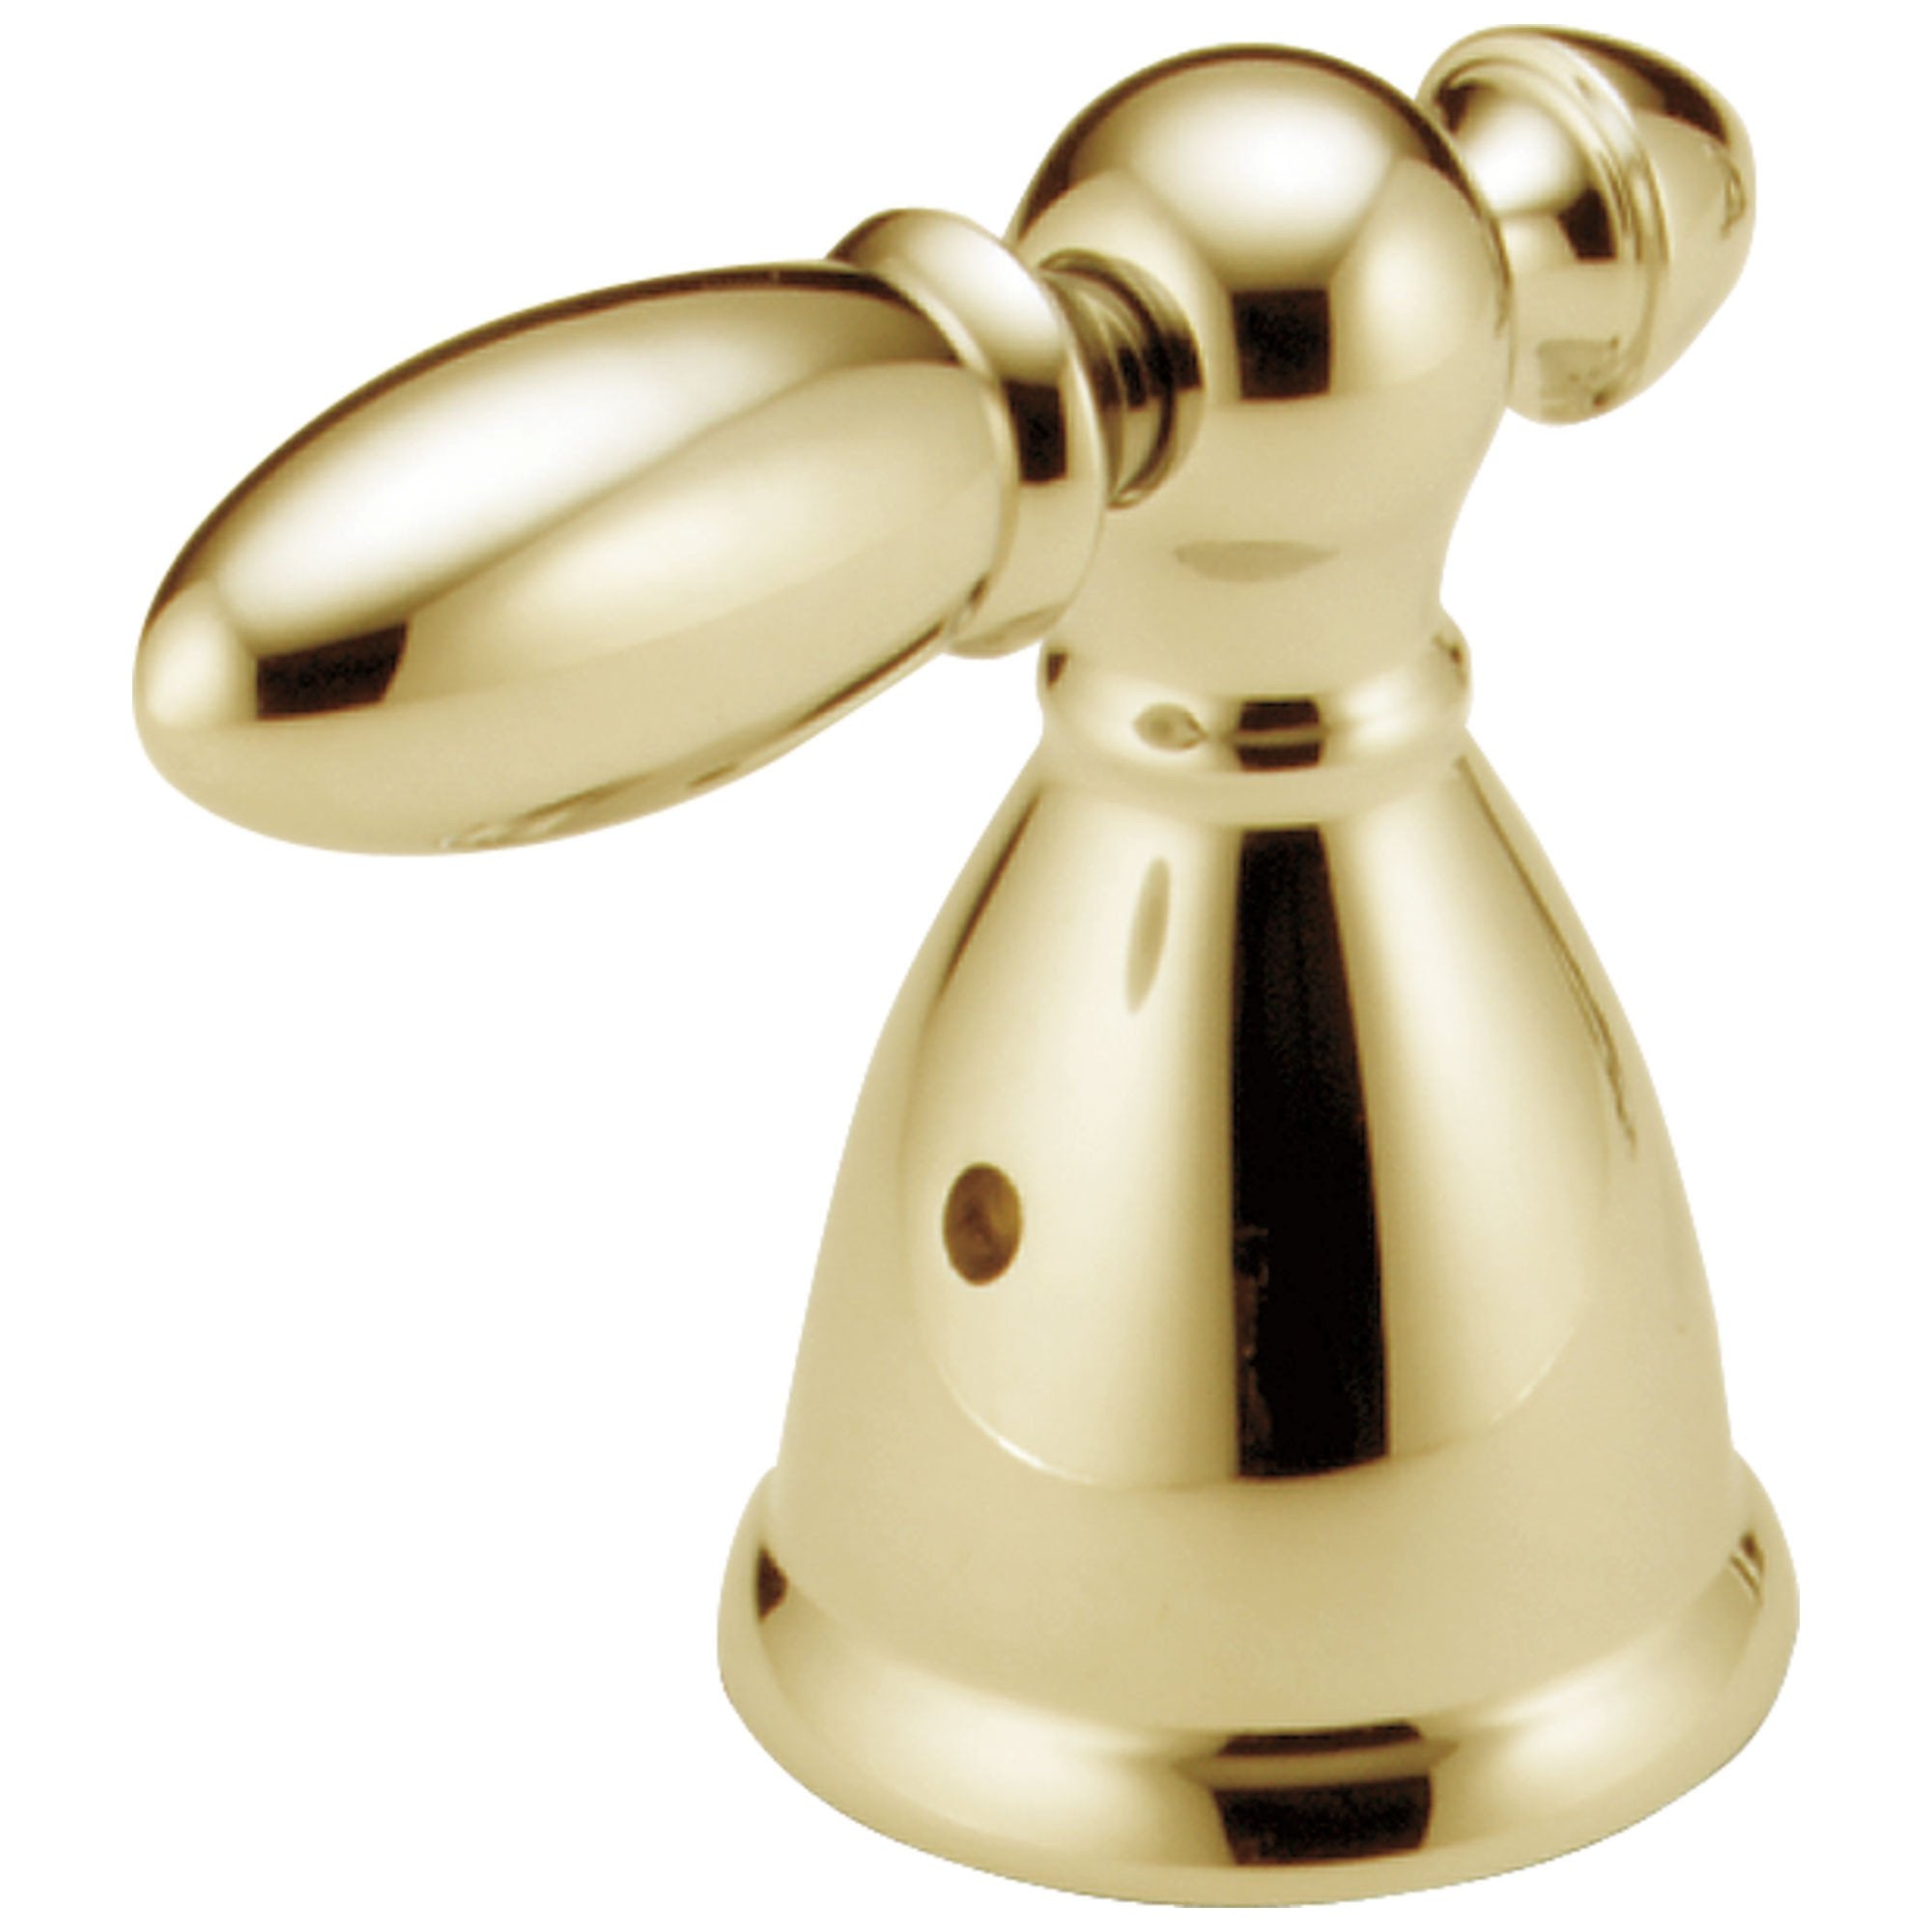 Delta Victorian Collection Polished Brass Finish Roman Tub Metal Lever Handles - Quantity 2 Included 387193